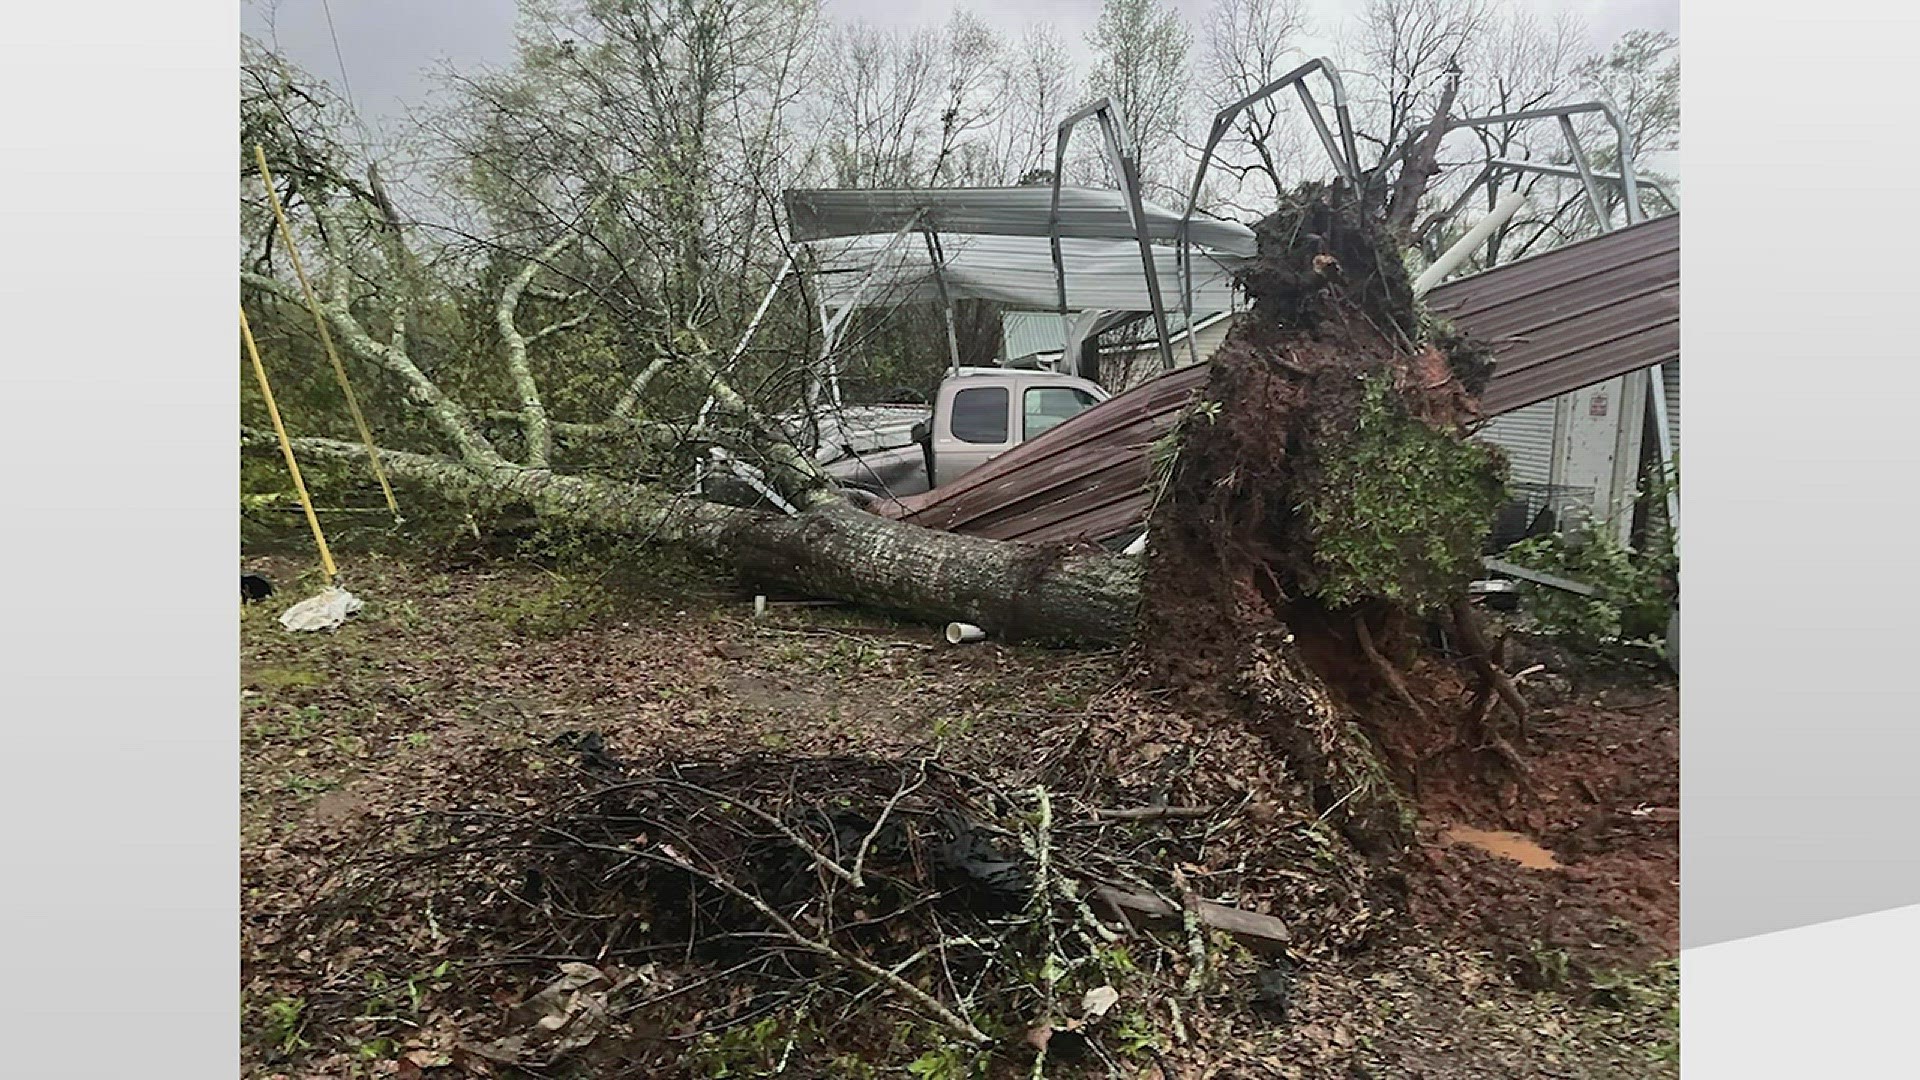 On Sunday morning, two tornadoes swept through Georgia -- in Milledgeville and near LaGrange. Several were hurt, but no one was killed. It left widespread damage.